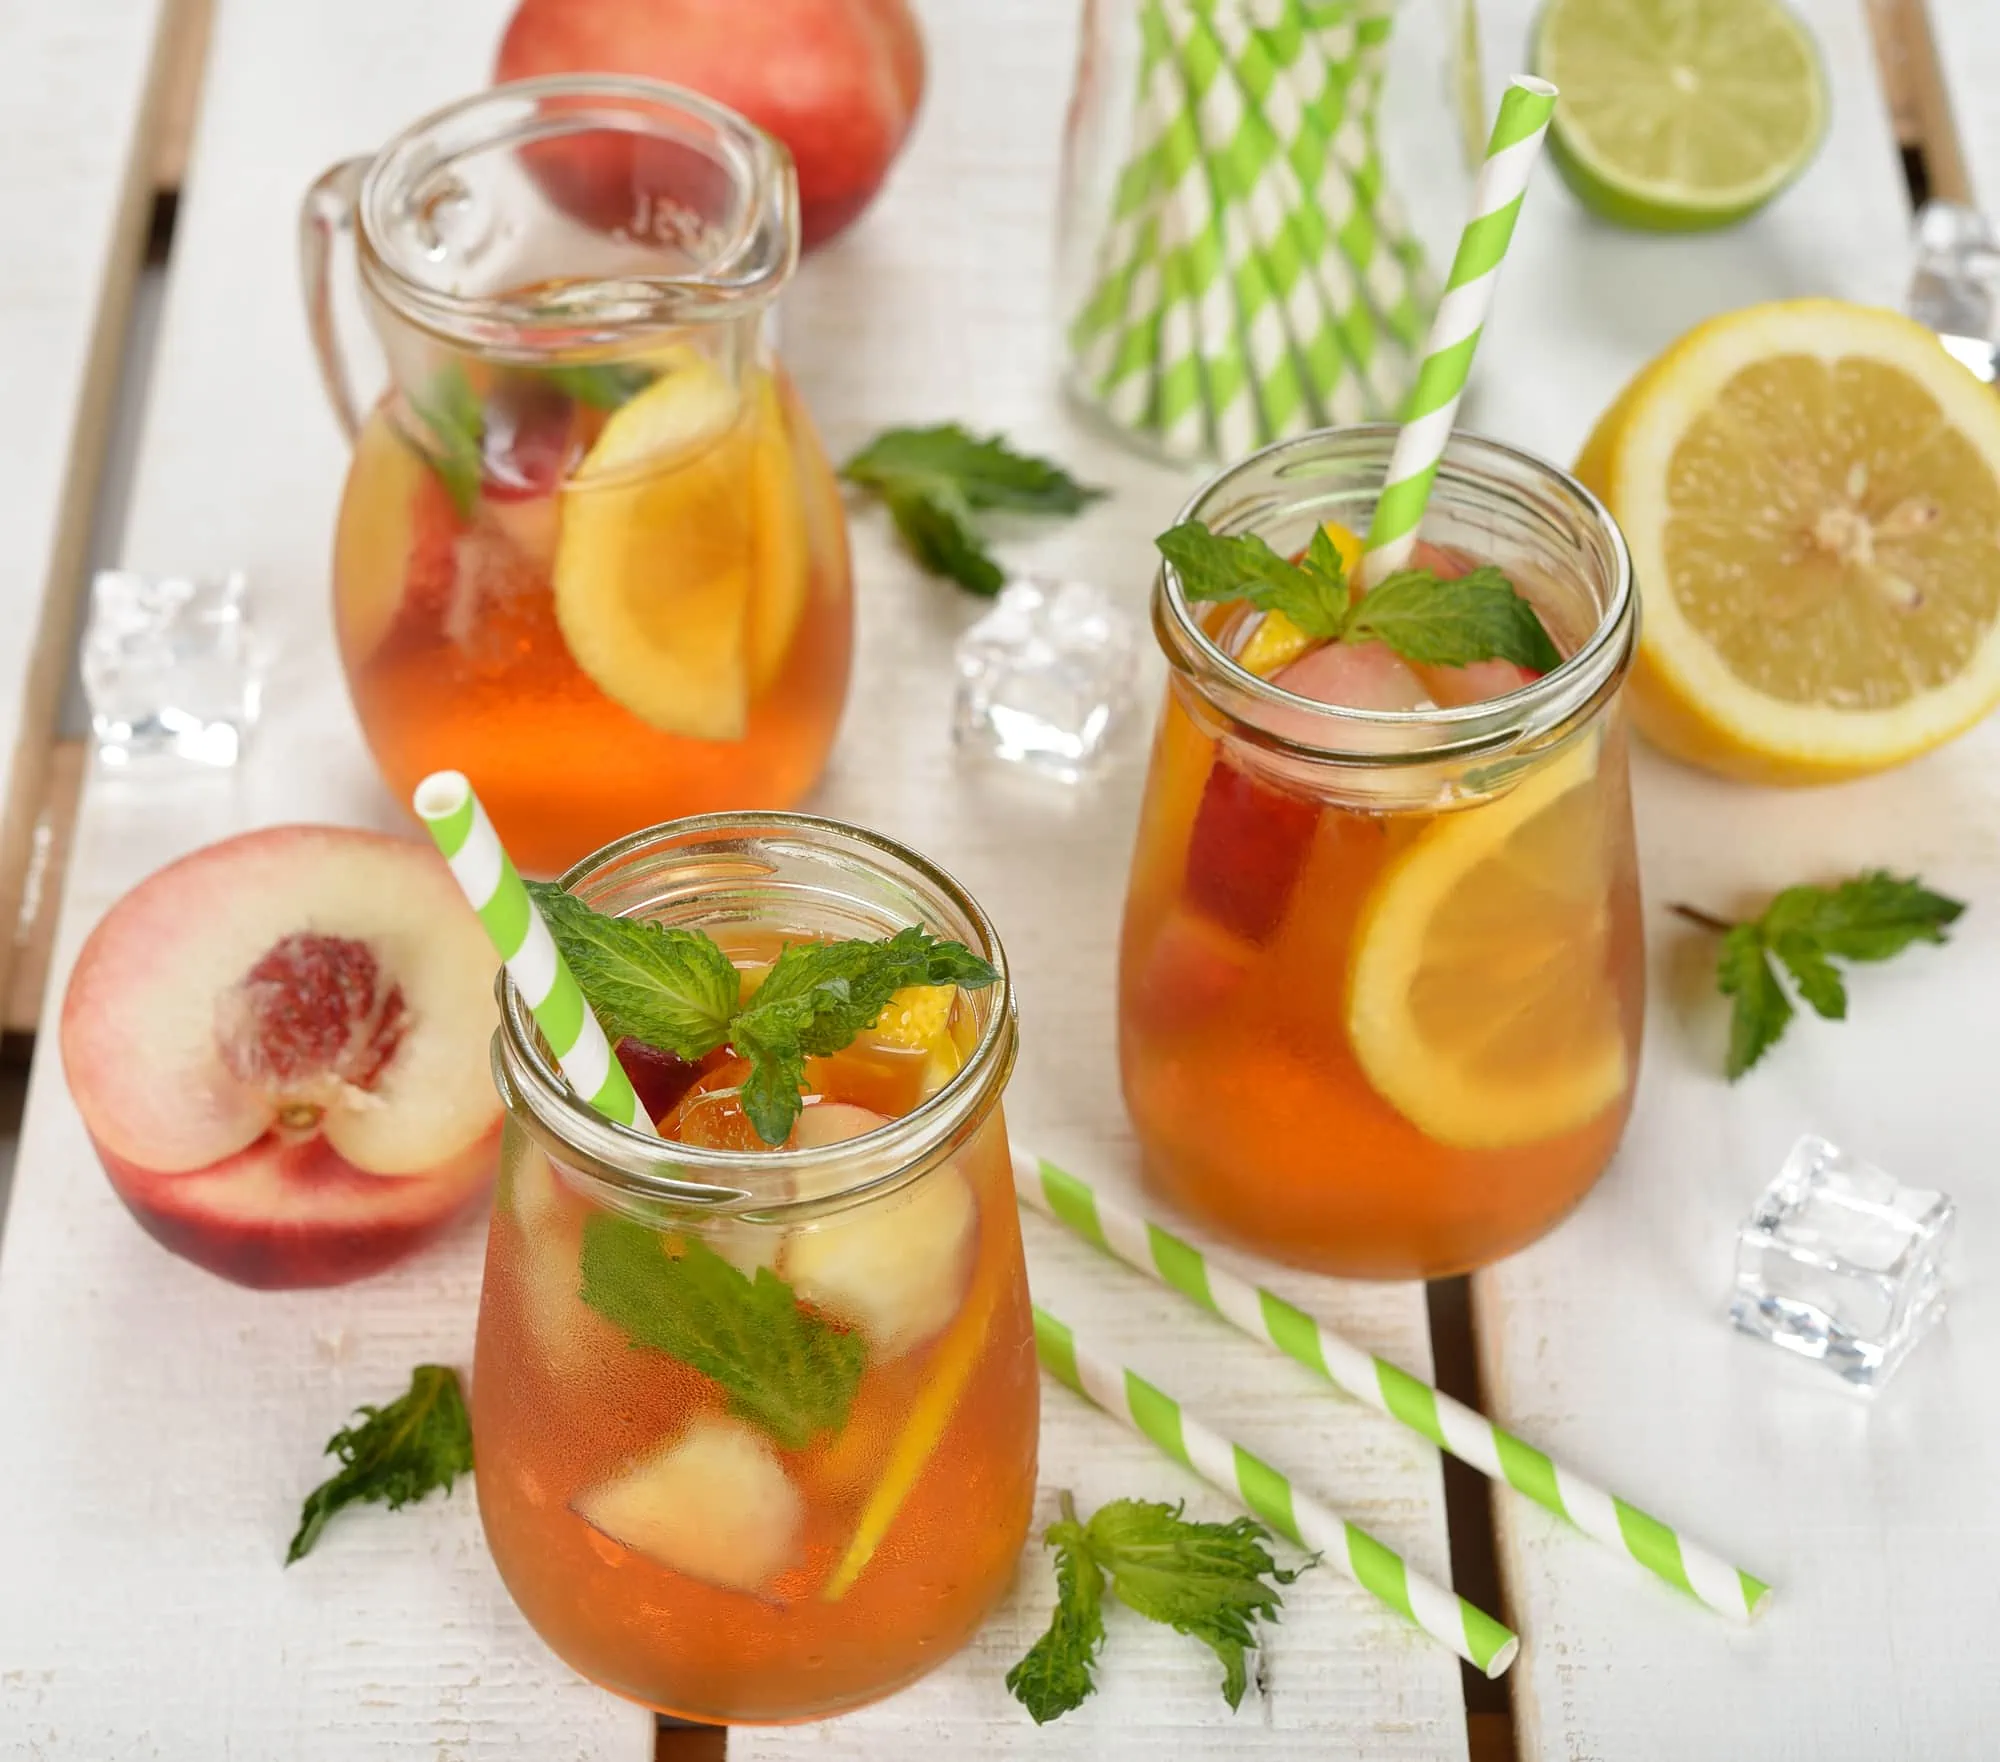 Ice tea with lemon, peach and mint on a white background